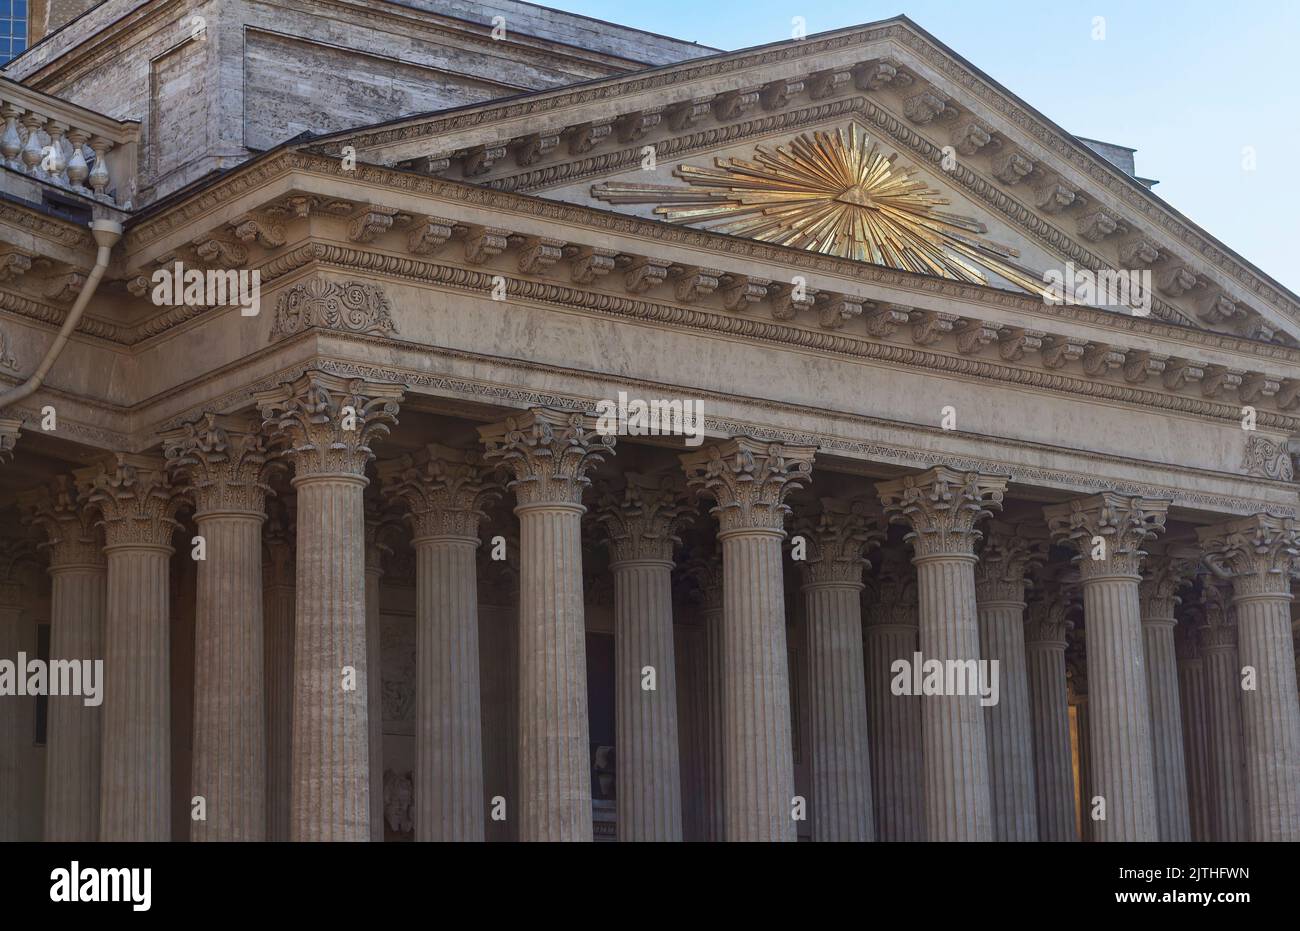 St. Petersburg Kazan Cathedral. Russian classicism architecture. part of facade All-seeing eye on roof of cathedral, shallow DOF, copy space. tourism Stock Photo